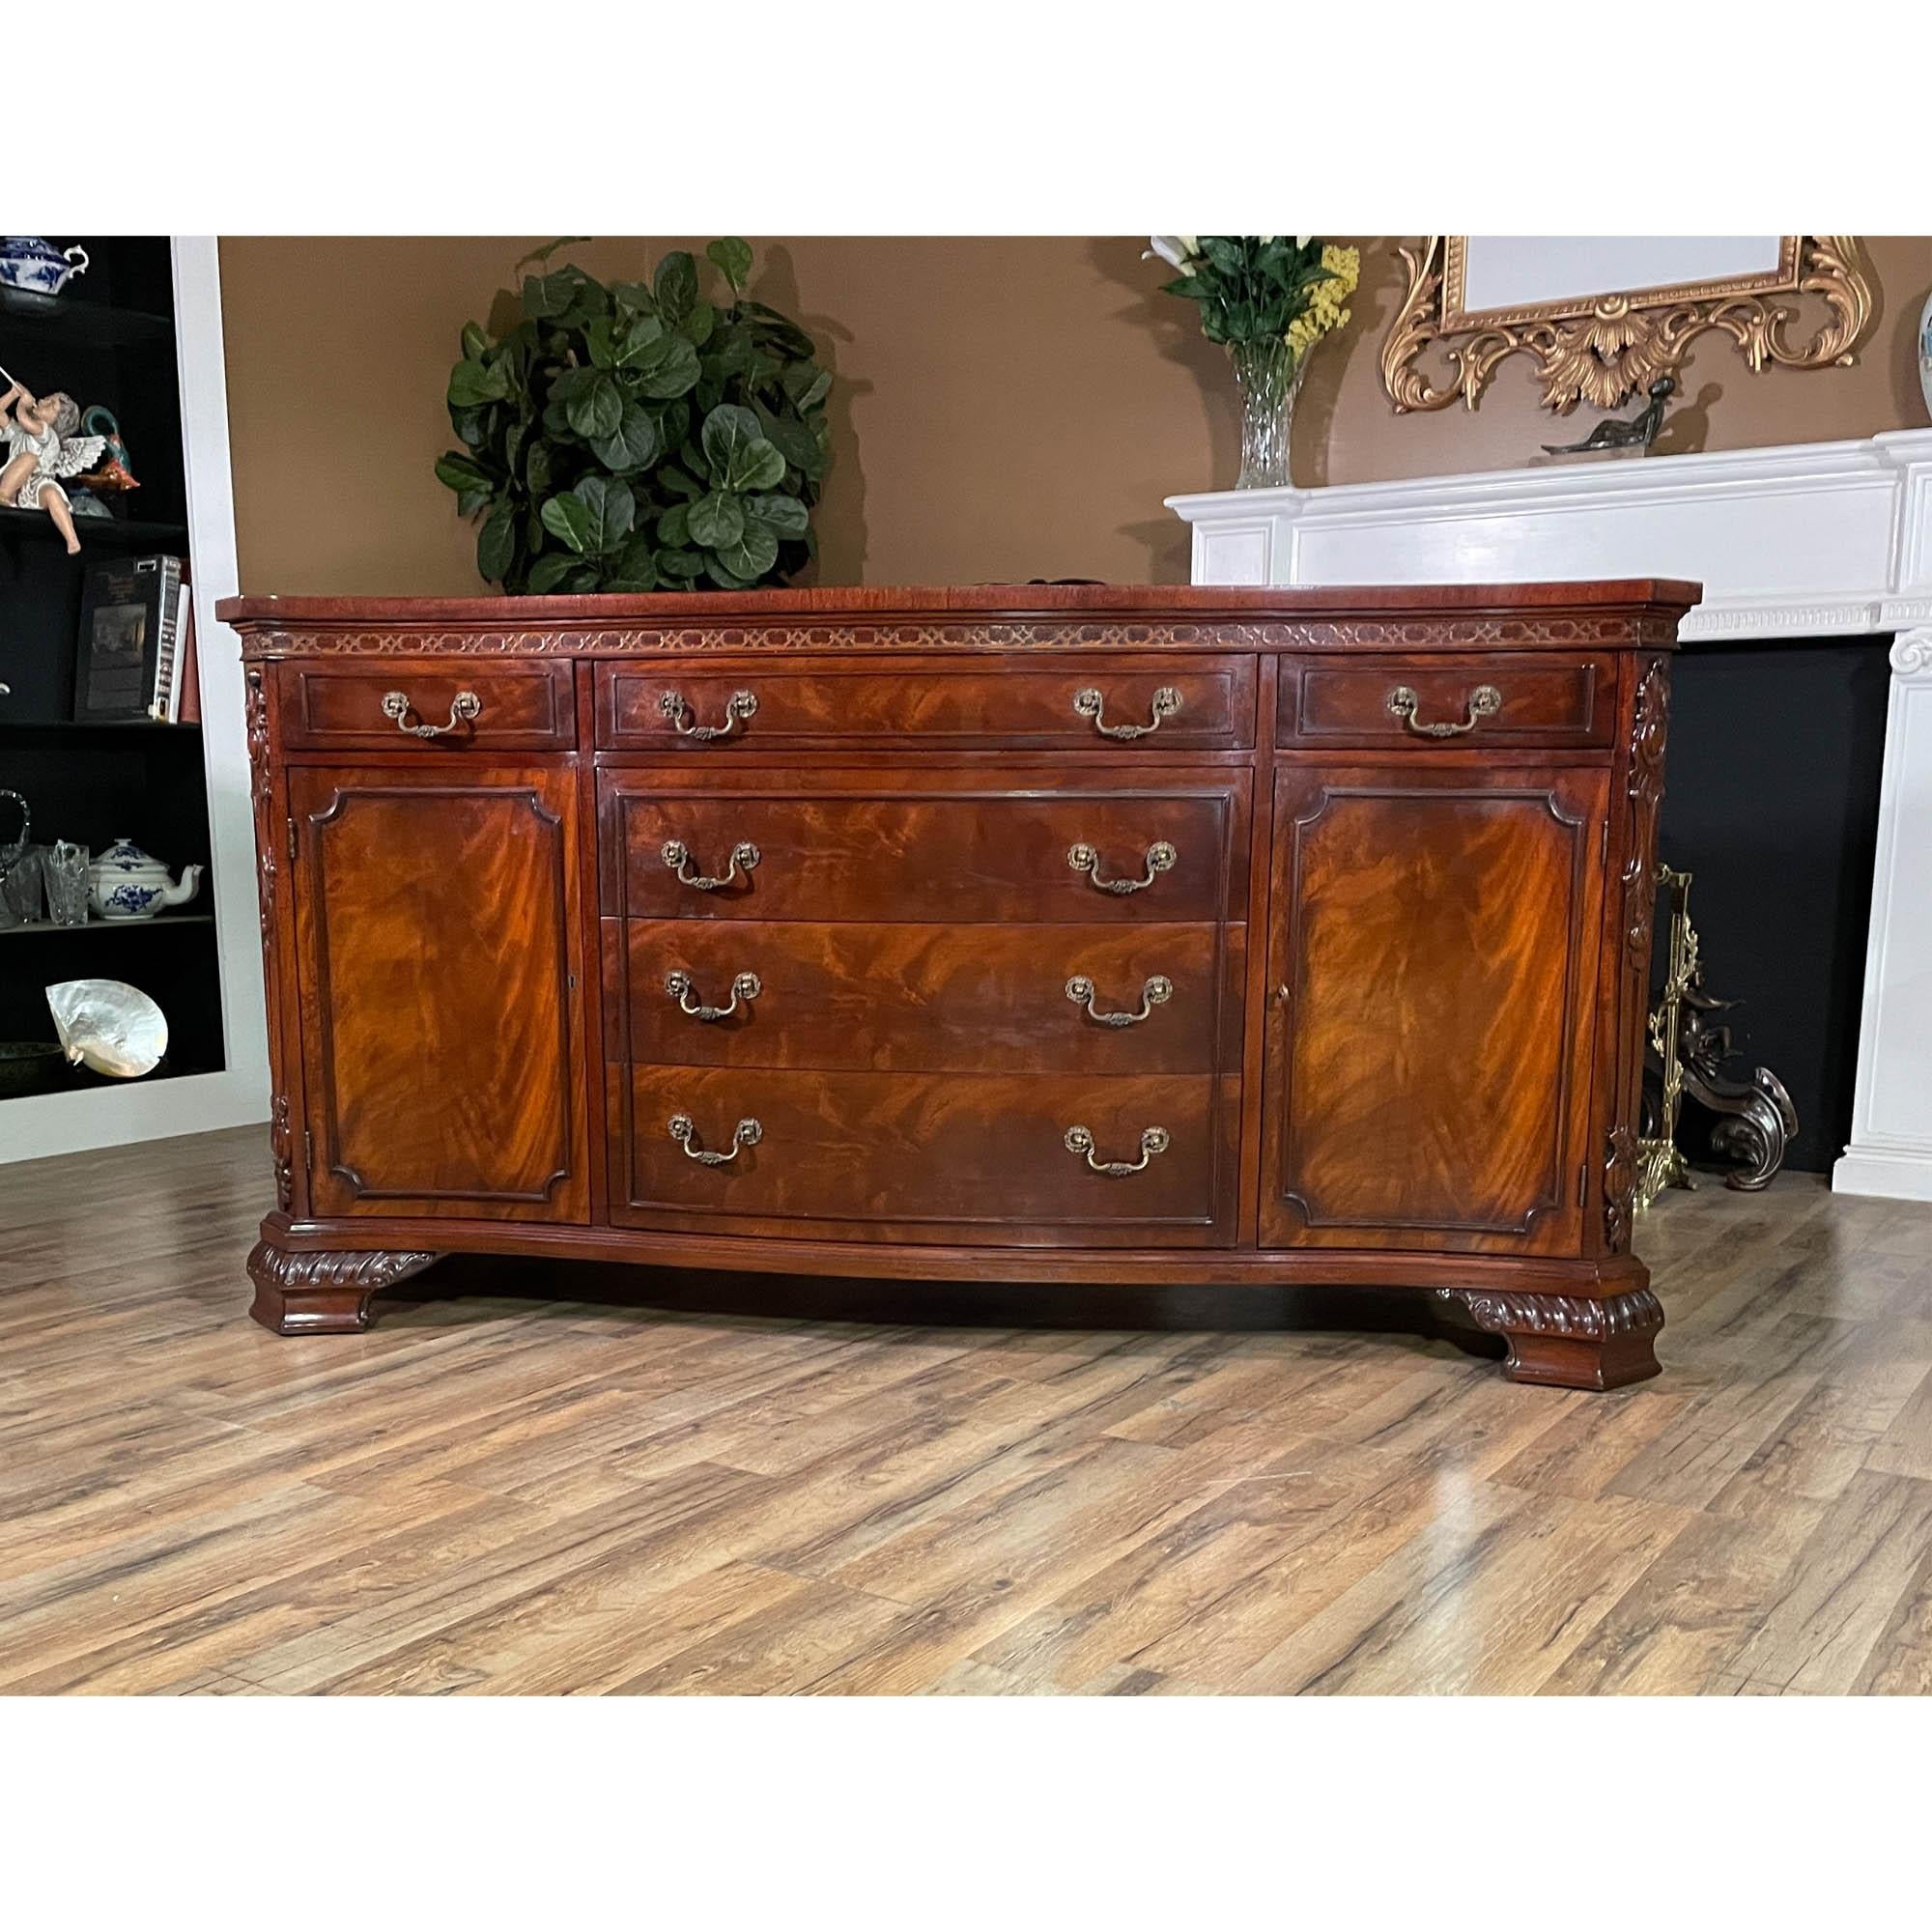 A Vintage Vintage John Stuart Sideboard with serpentine front brought to you by Niagara Furniture. This sideboard is in great original condition and the top has recently been restored to its’ factory original finish. The Vintage John Stuart